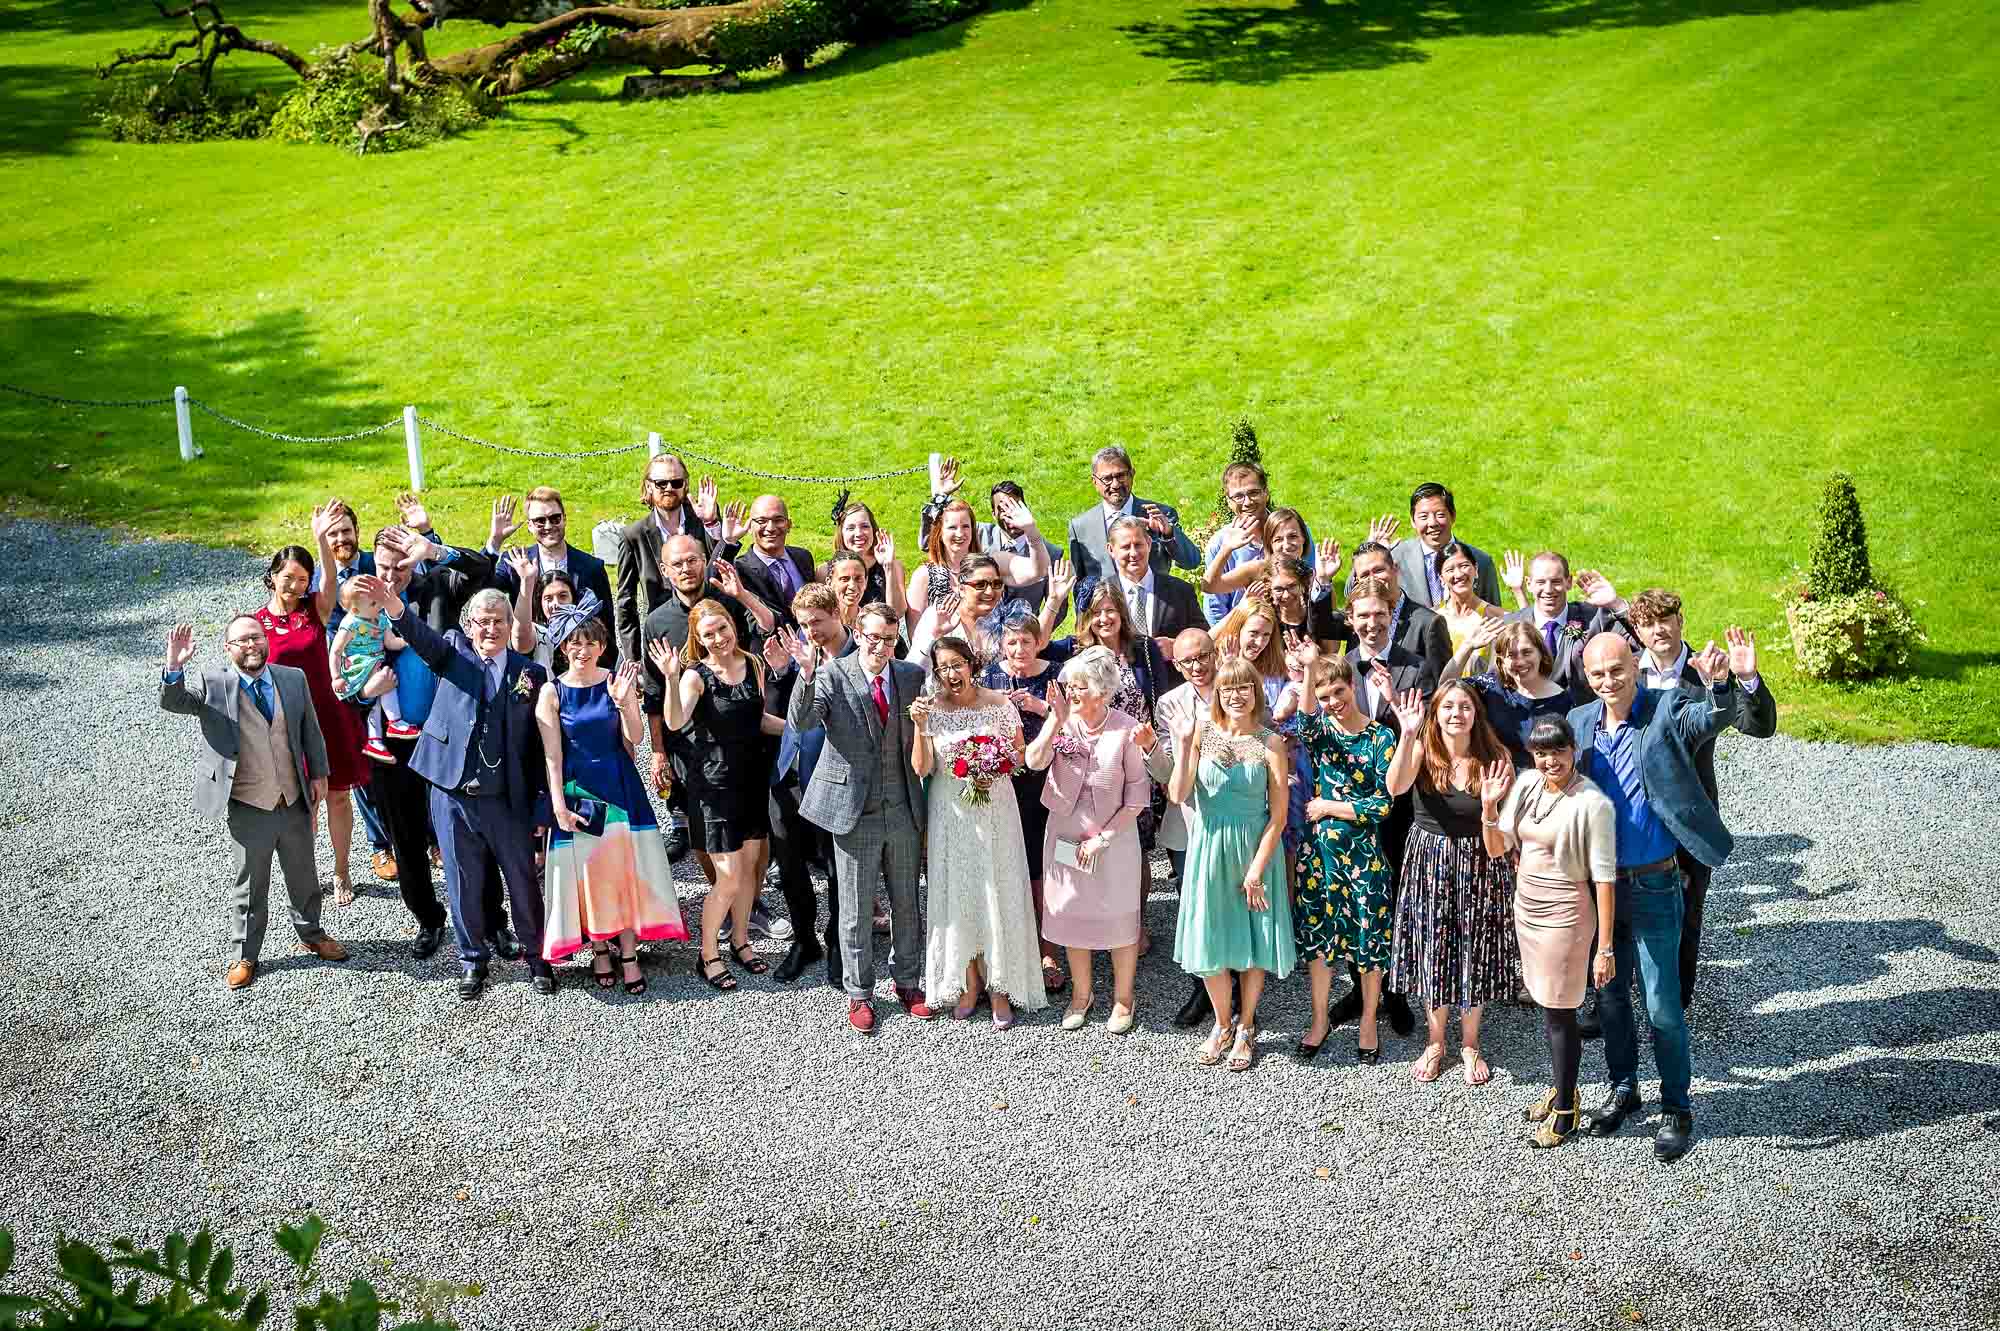 The entire wedding party waving in group photo outside Plas Glansevin